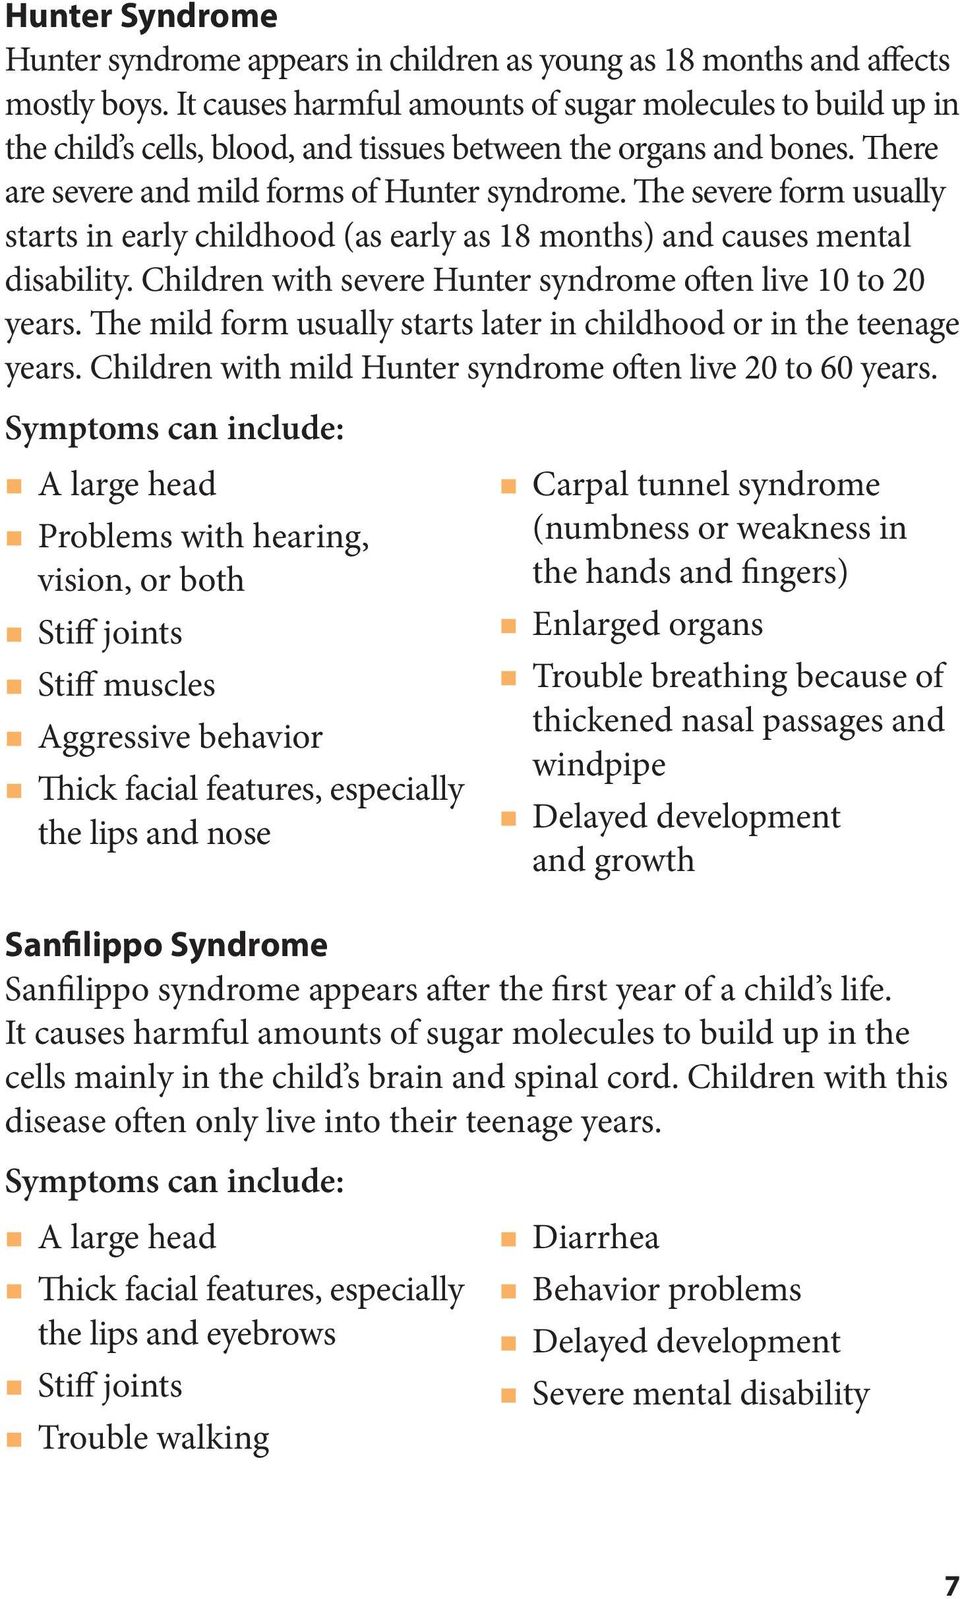 The severe form usually starts in early childhood (as early as 18 months) and causes mental disability. Children with severe Hunter syndrome often live 10 to 20 years.